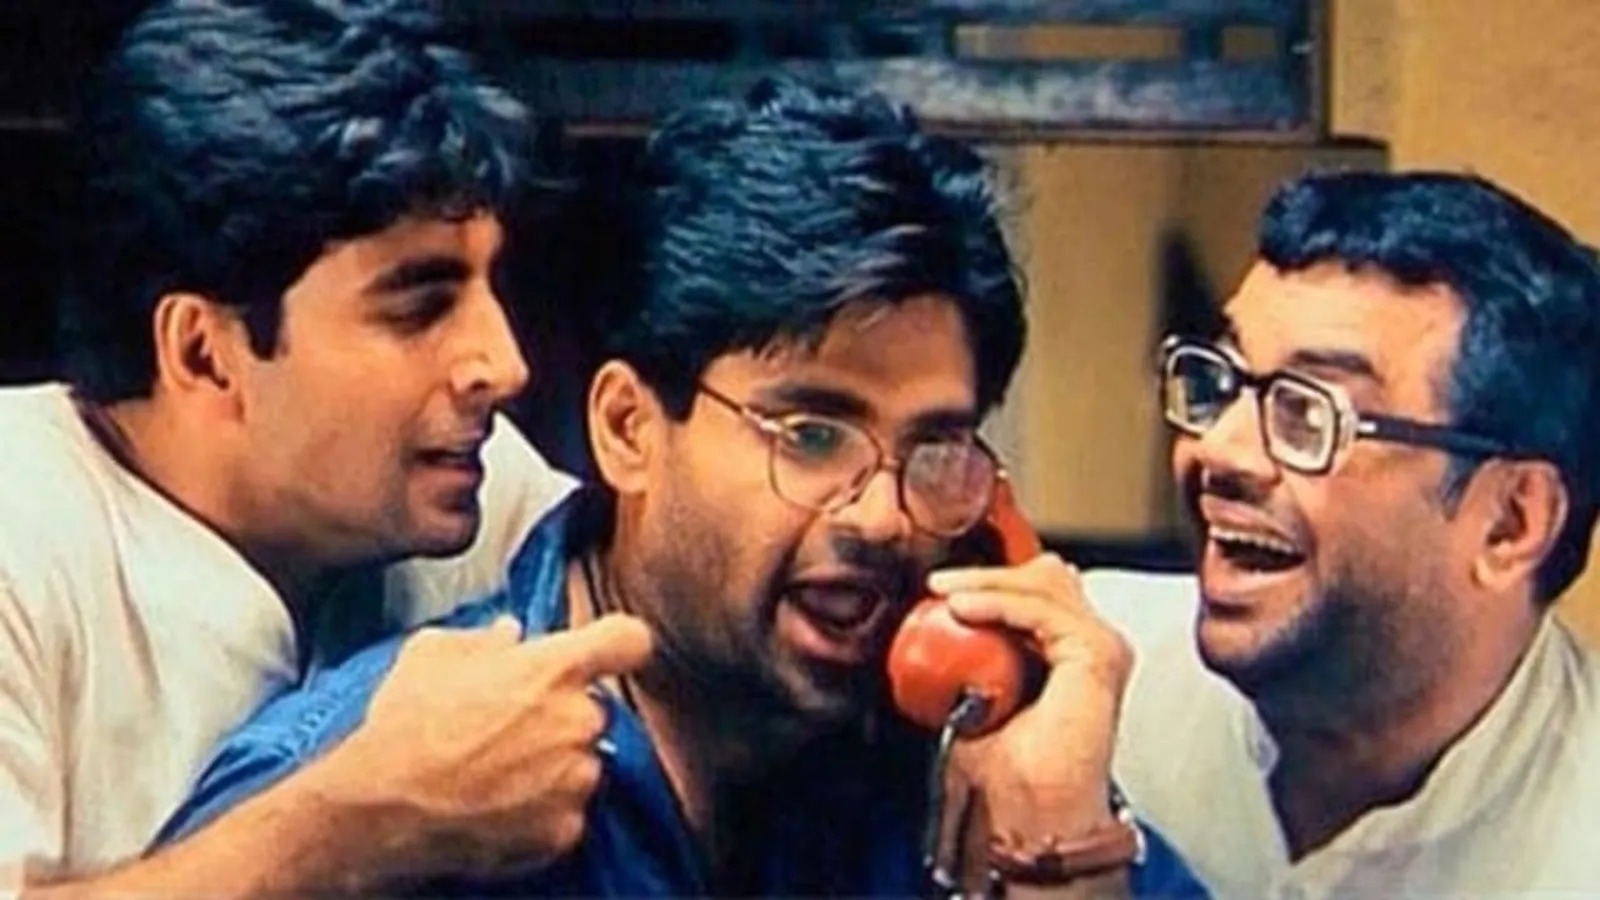 The iconic comedy Bollywood films 'Hera Pheri' and then 'Hera Pheri' were liked by the people. People have been demanding the third film of this franchise for a long time. In the past, there was a lot of news about the film 'Hera Pheri 3'. The film 'Hera Pheri 3' has been the most discussed about its starcast.
As per reports there is Good News for Hera Pheri 3 Fans as Akshay Kumar’s Raju will Return with Suniel Shetty’s Shyaam and Paresh Rawal’s Babu Bhaiya for Film’s Sequel.